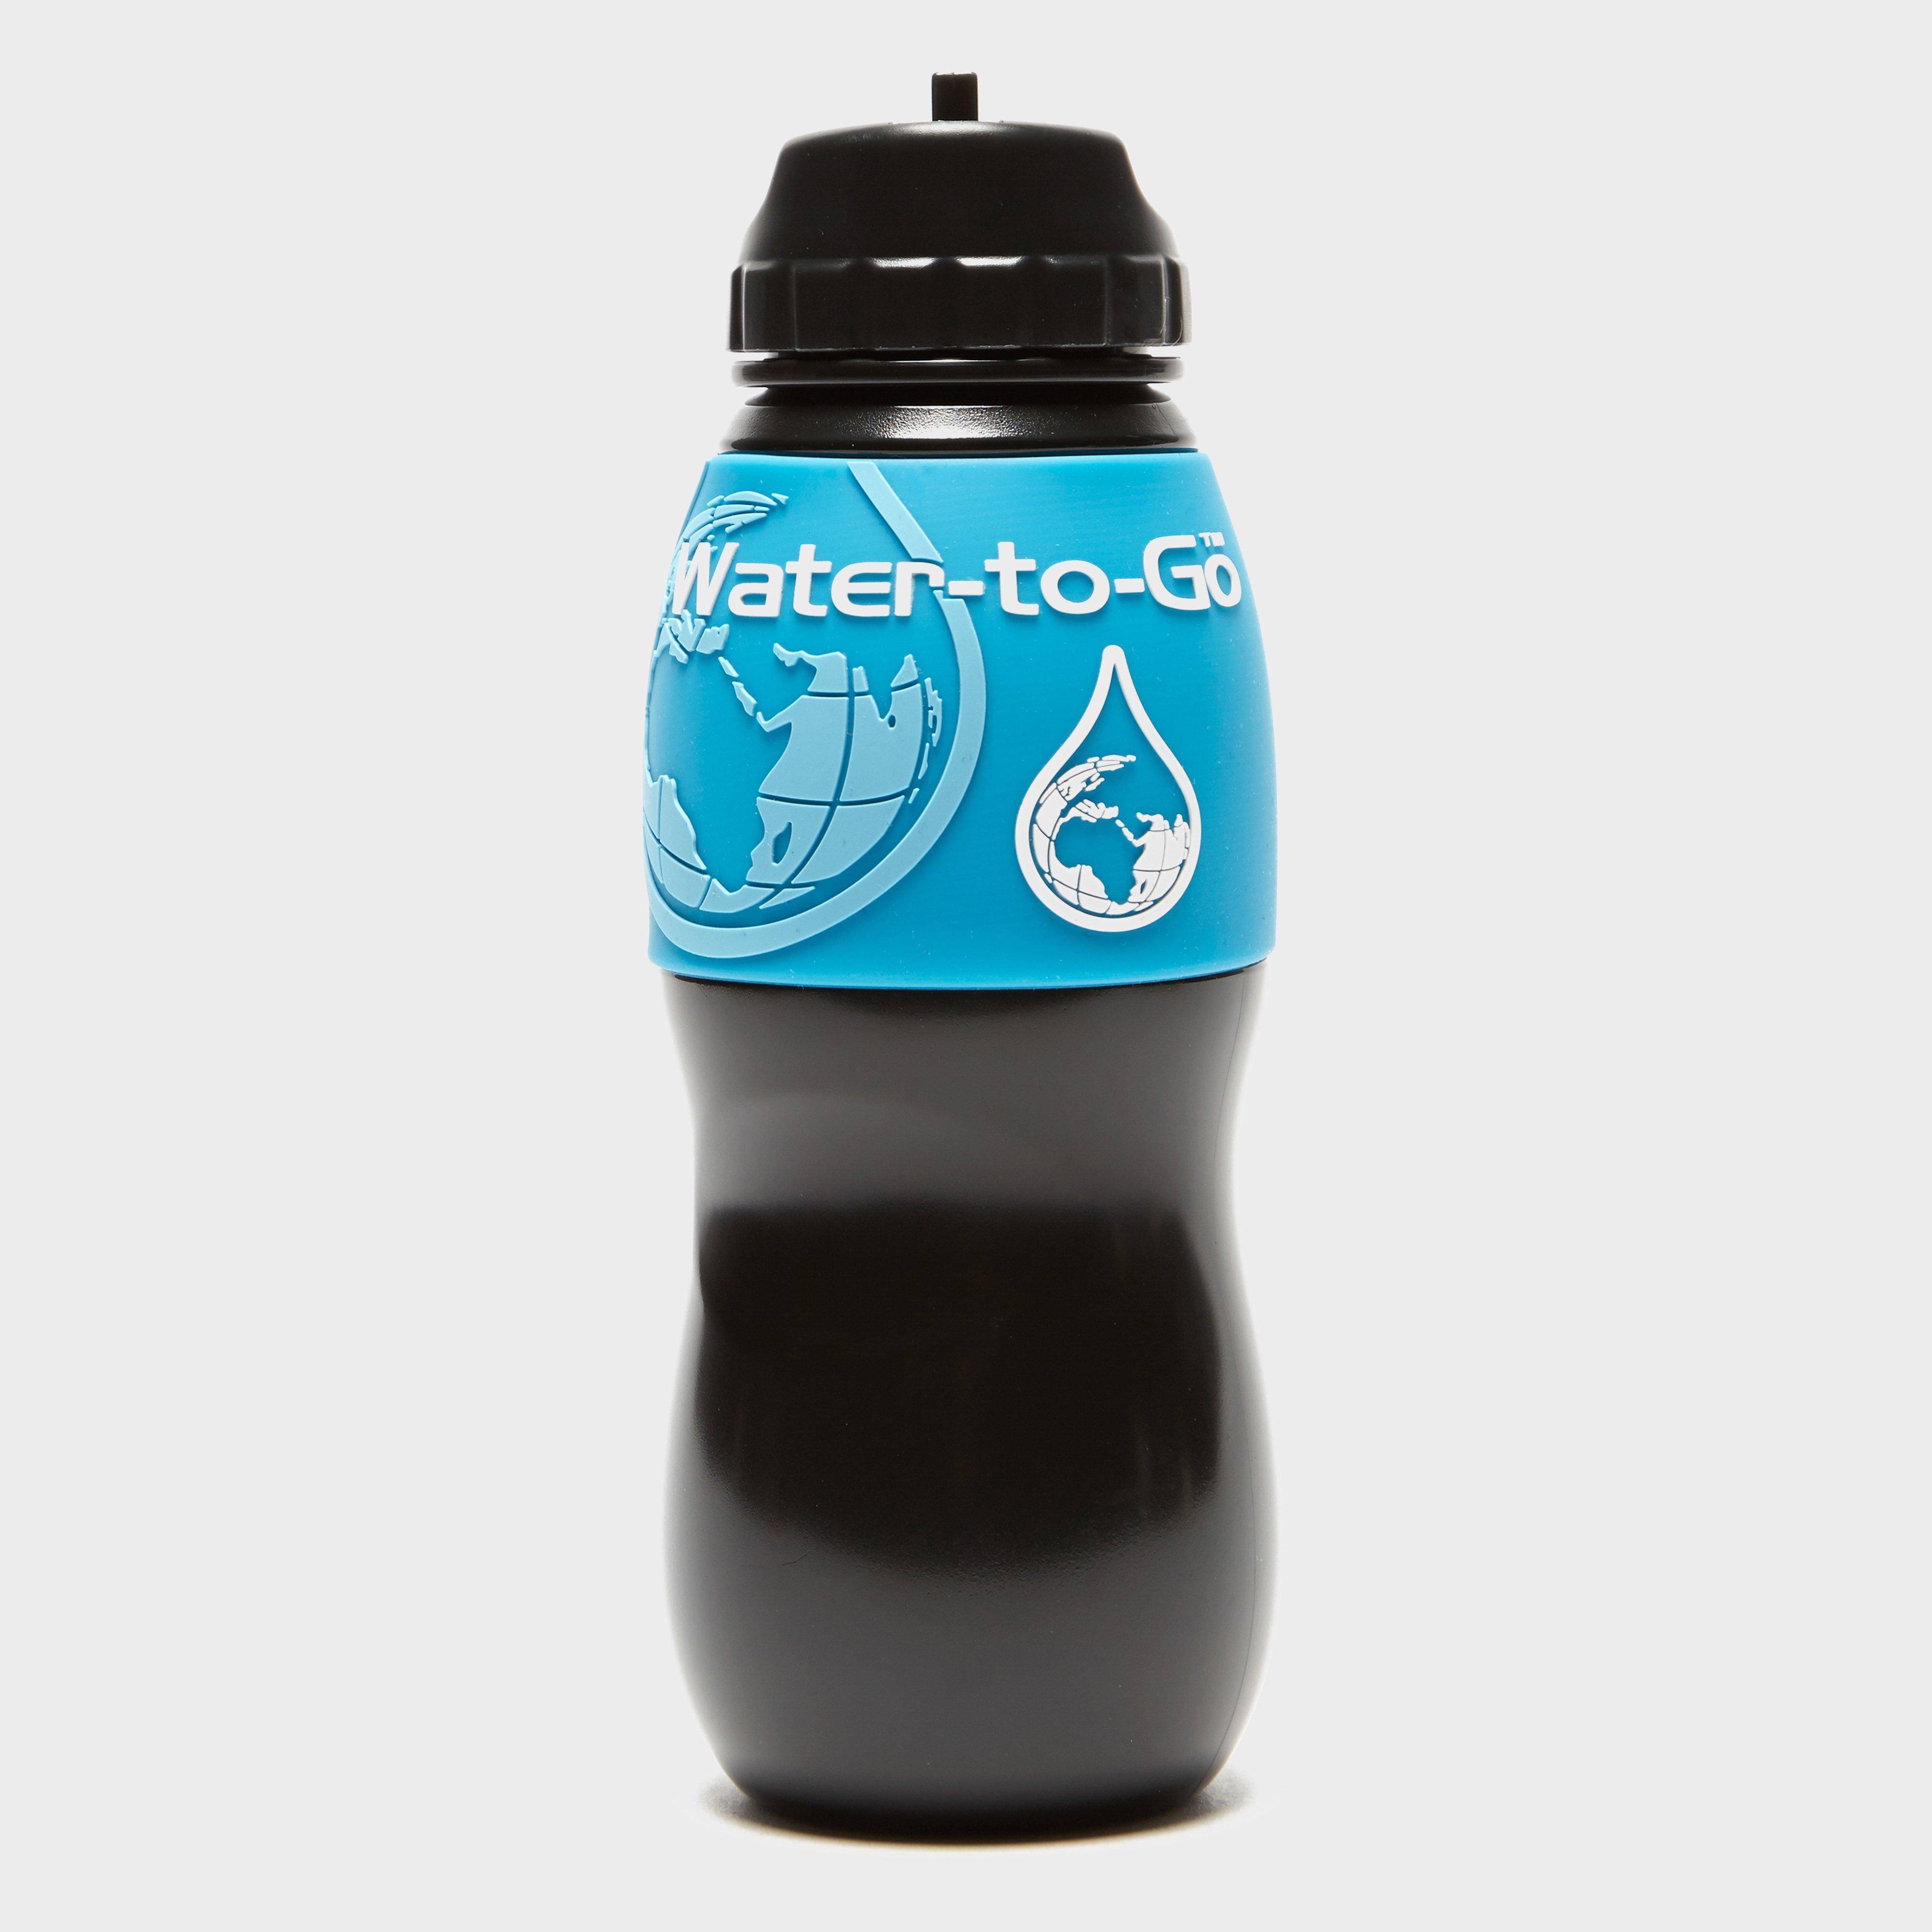 Water-to-go Filtered Water Bottle 750ml  Black